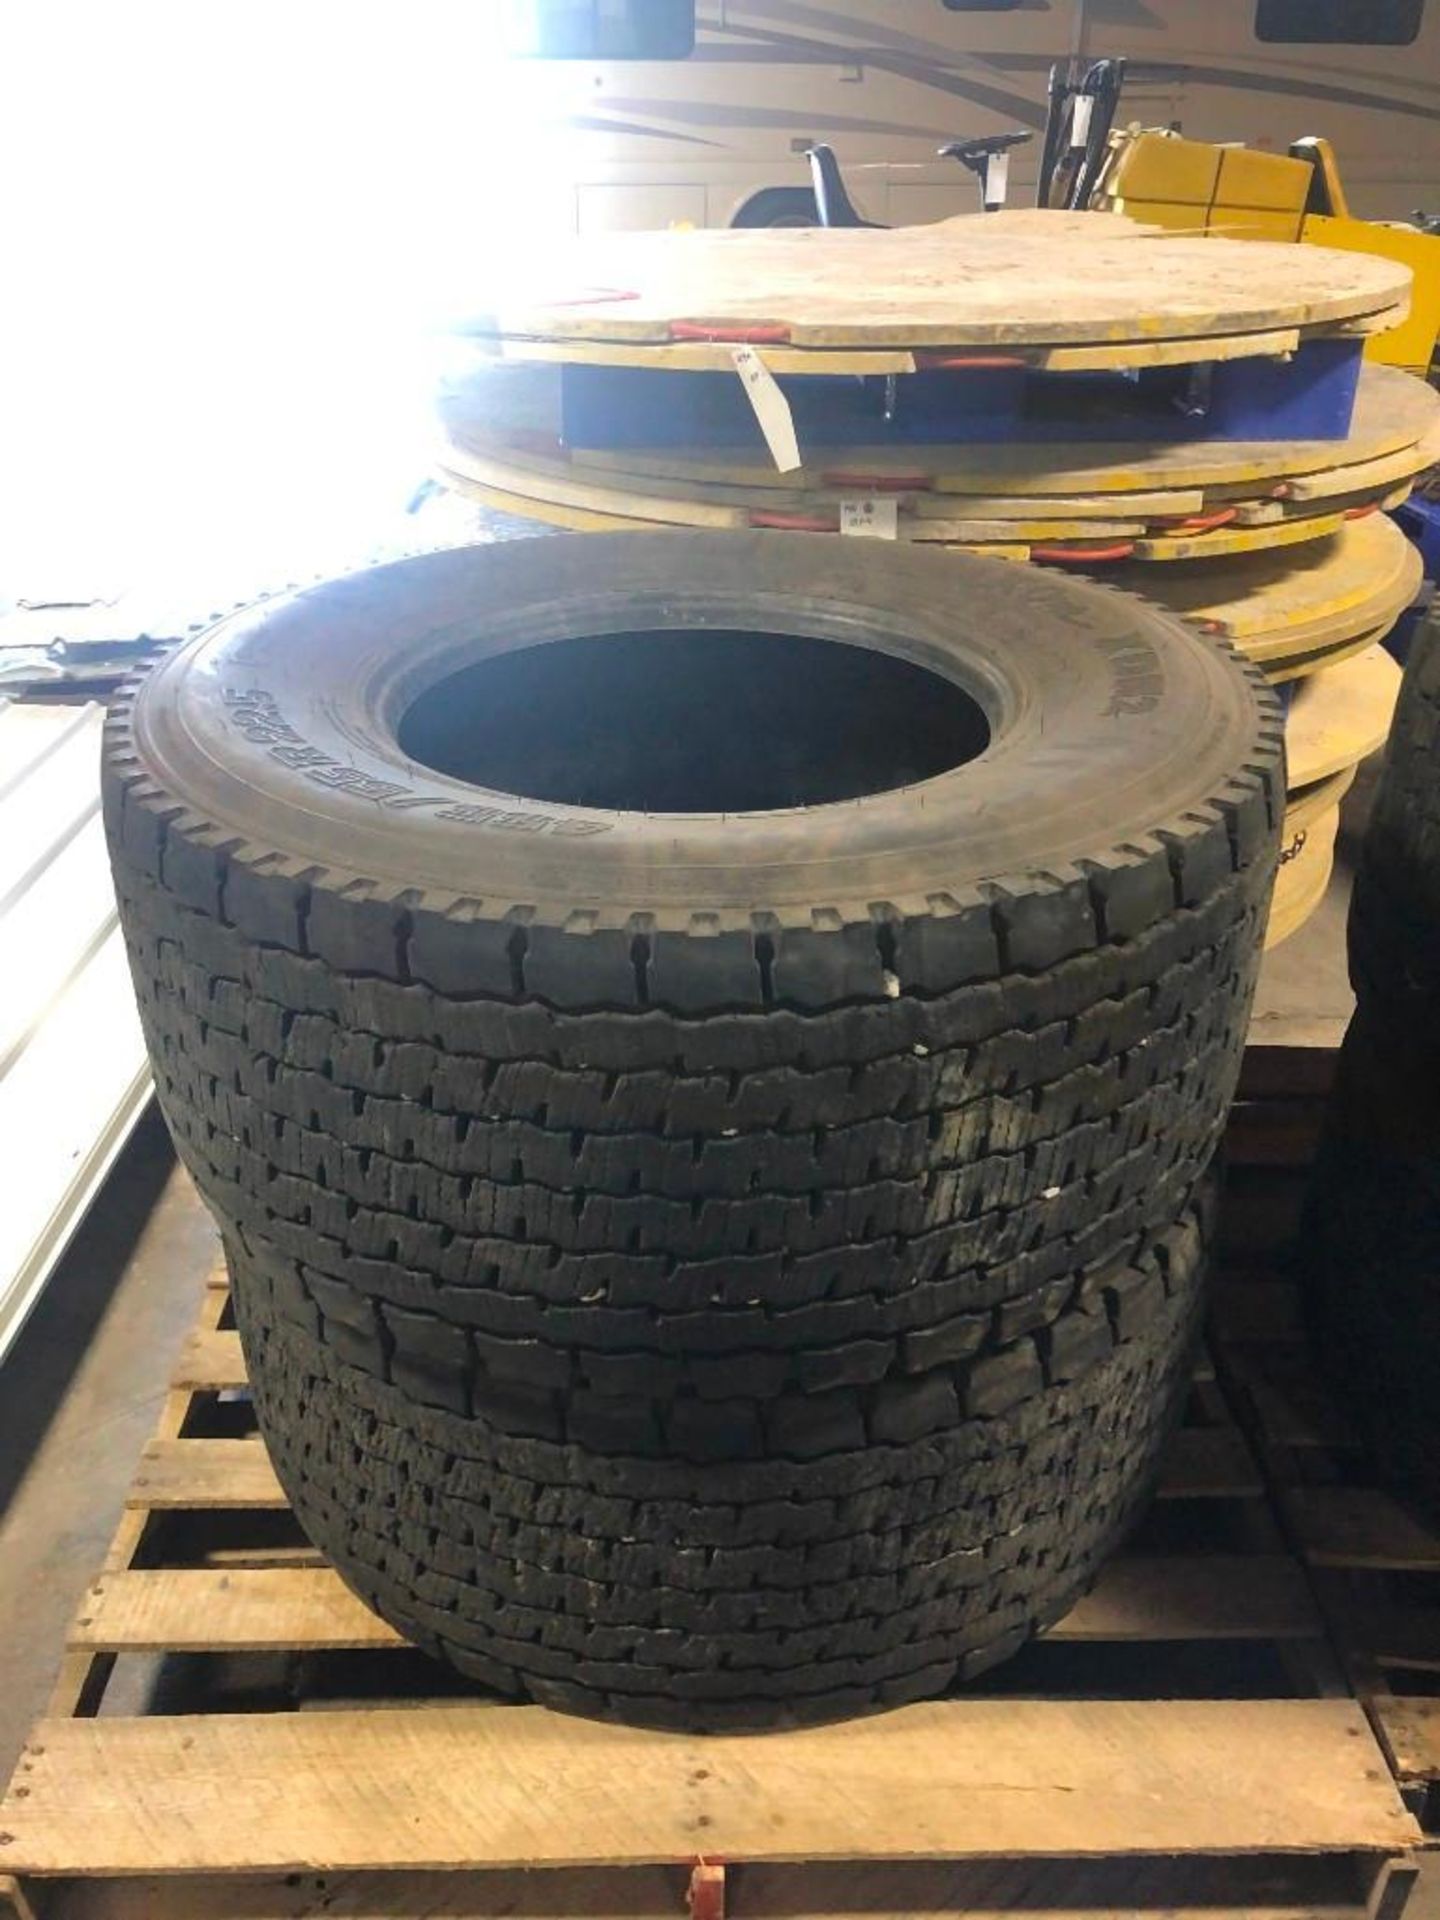 (2) Michelin 455/55R 22.5 Drive Tires. Located at 301 E Henry Street, Mt. Pleasant, IA 52641.